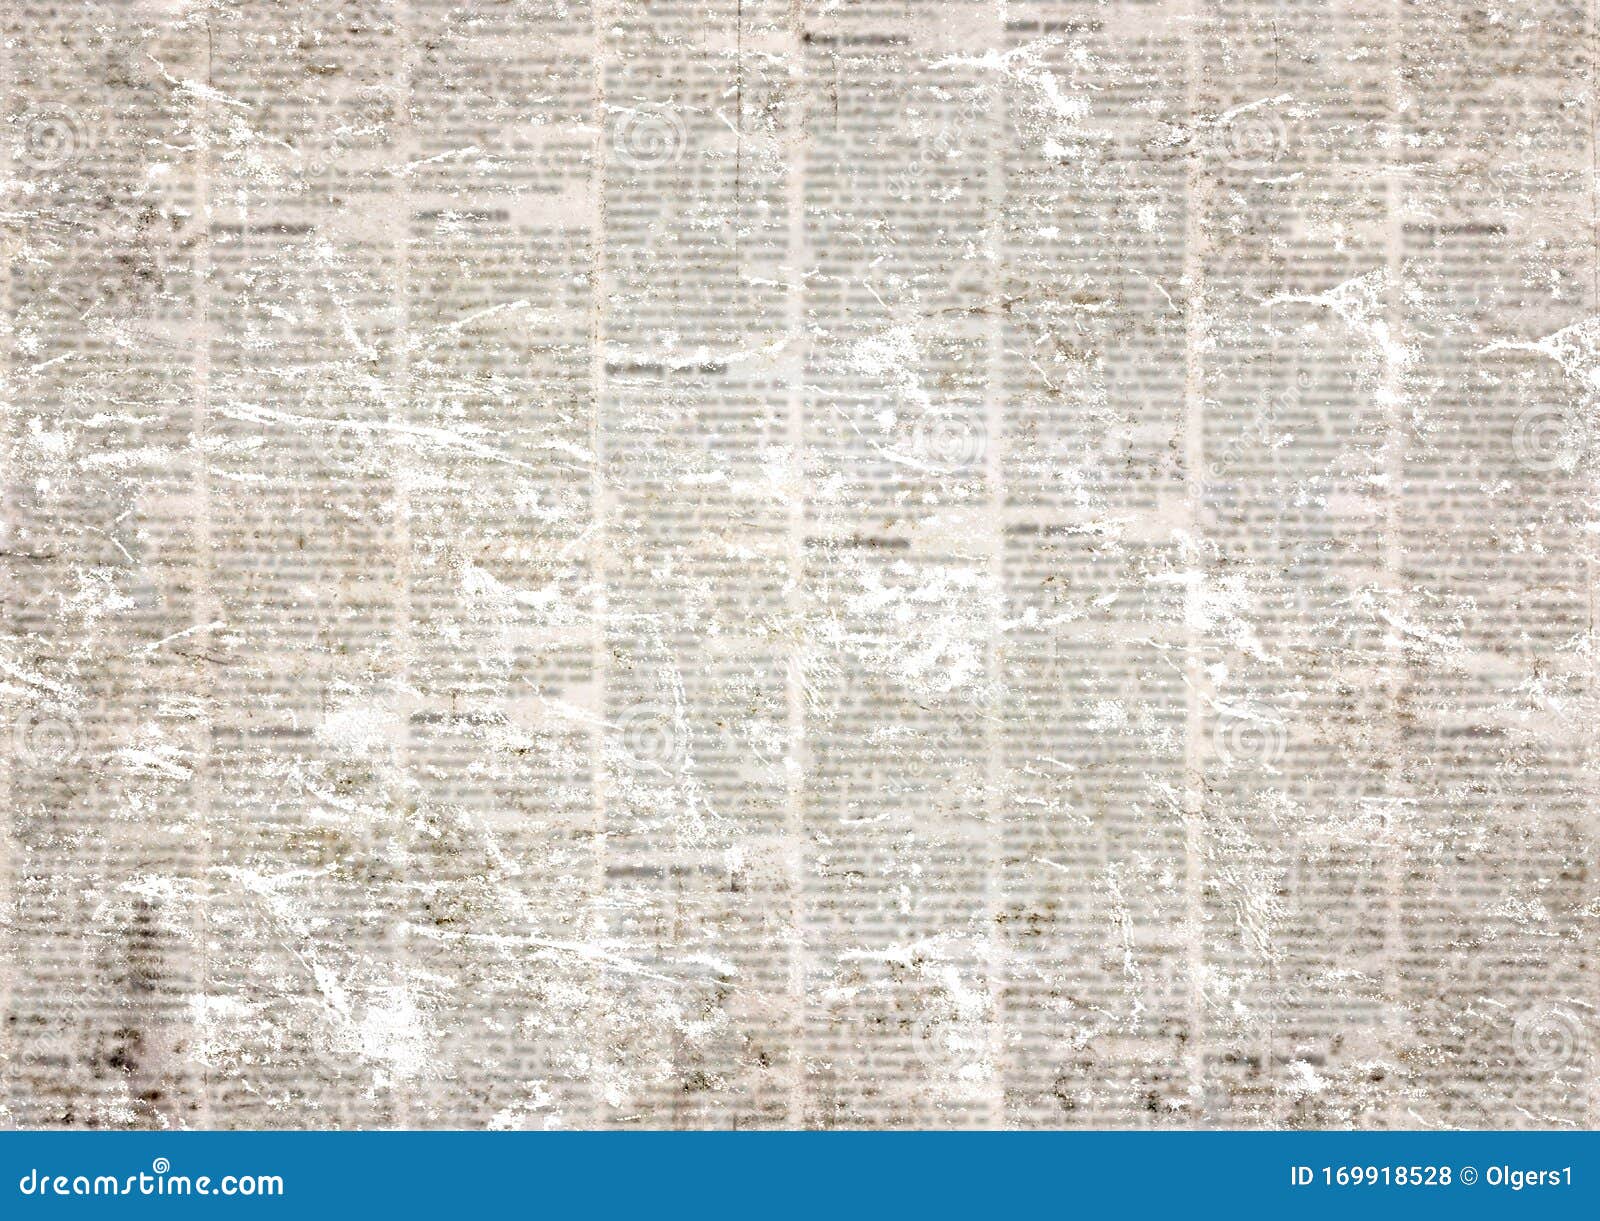 Old Vintage Grunge Newspaper Paper Texture Background Stock Photo - Image  of dirty, print: 169918528